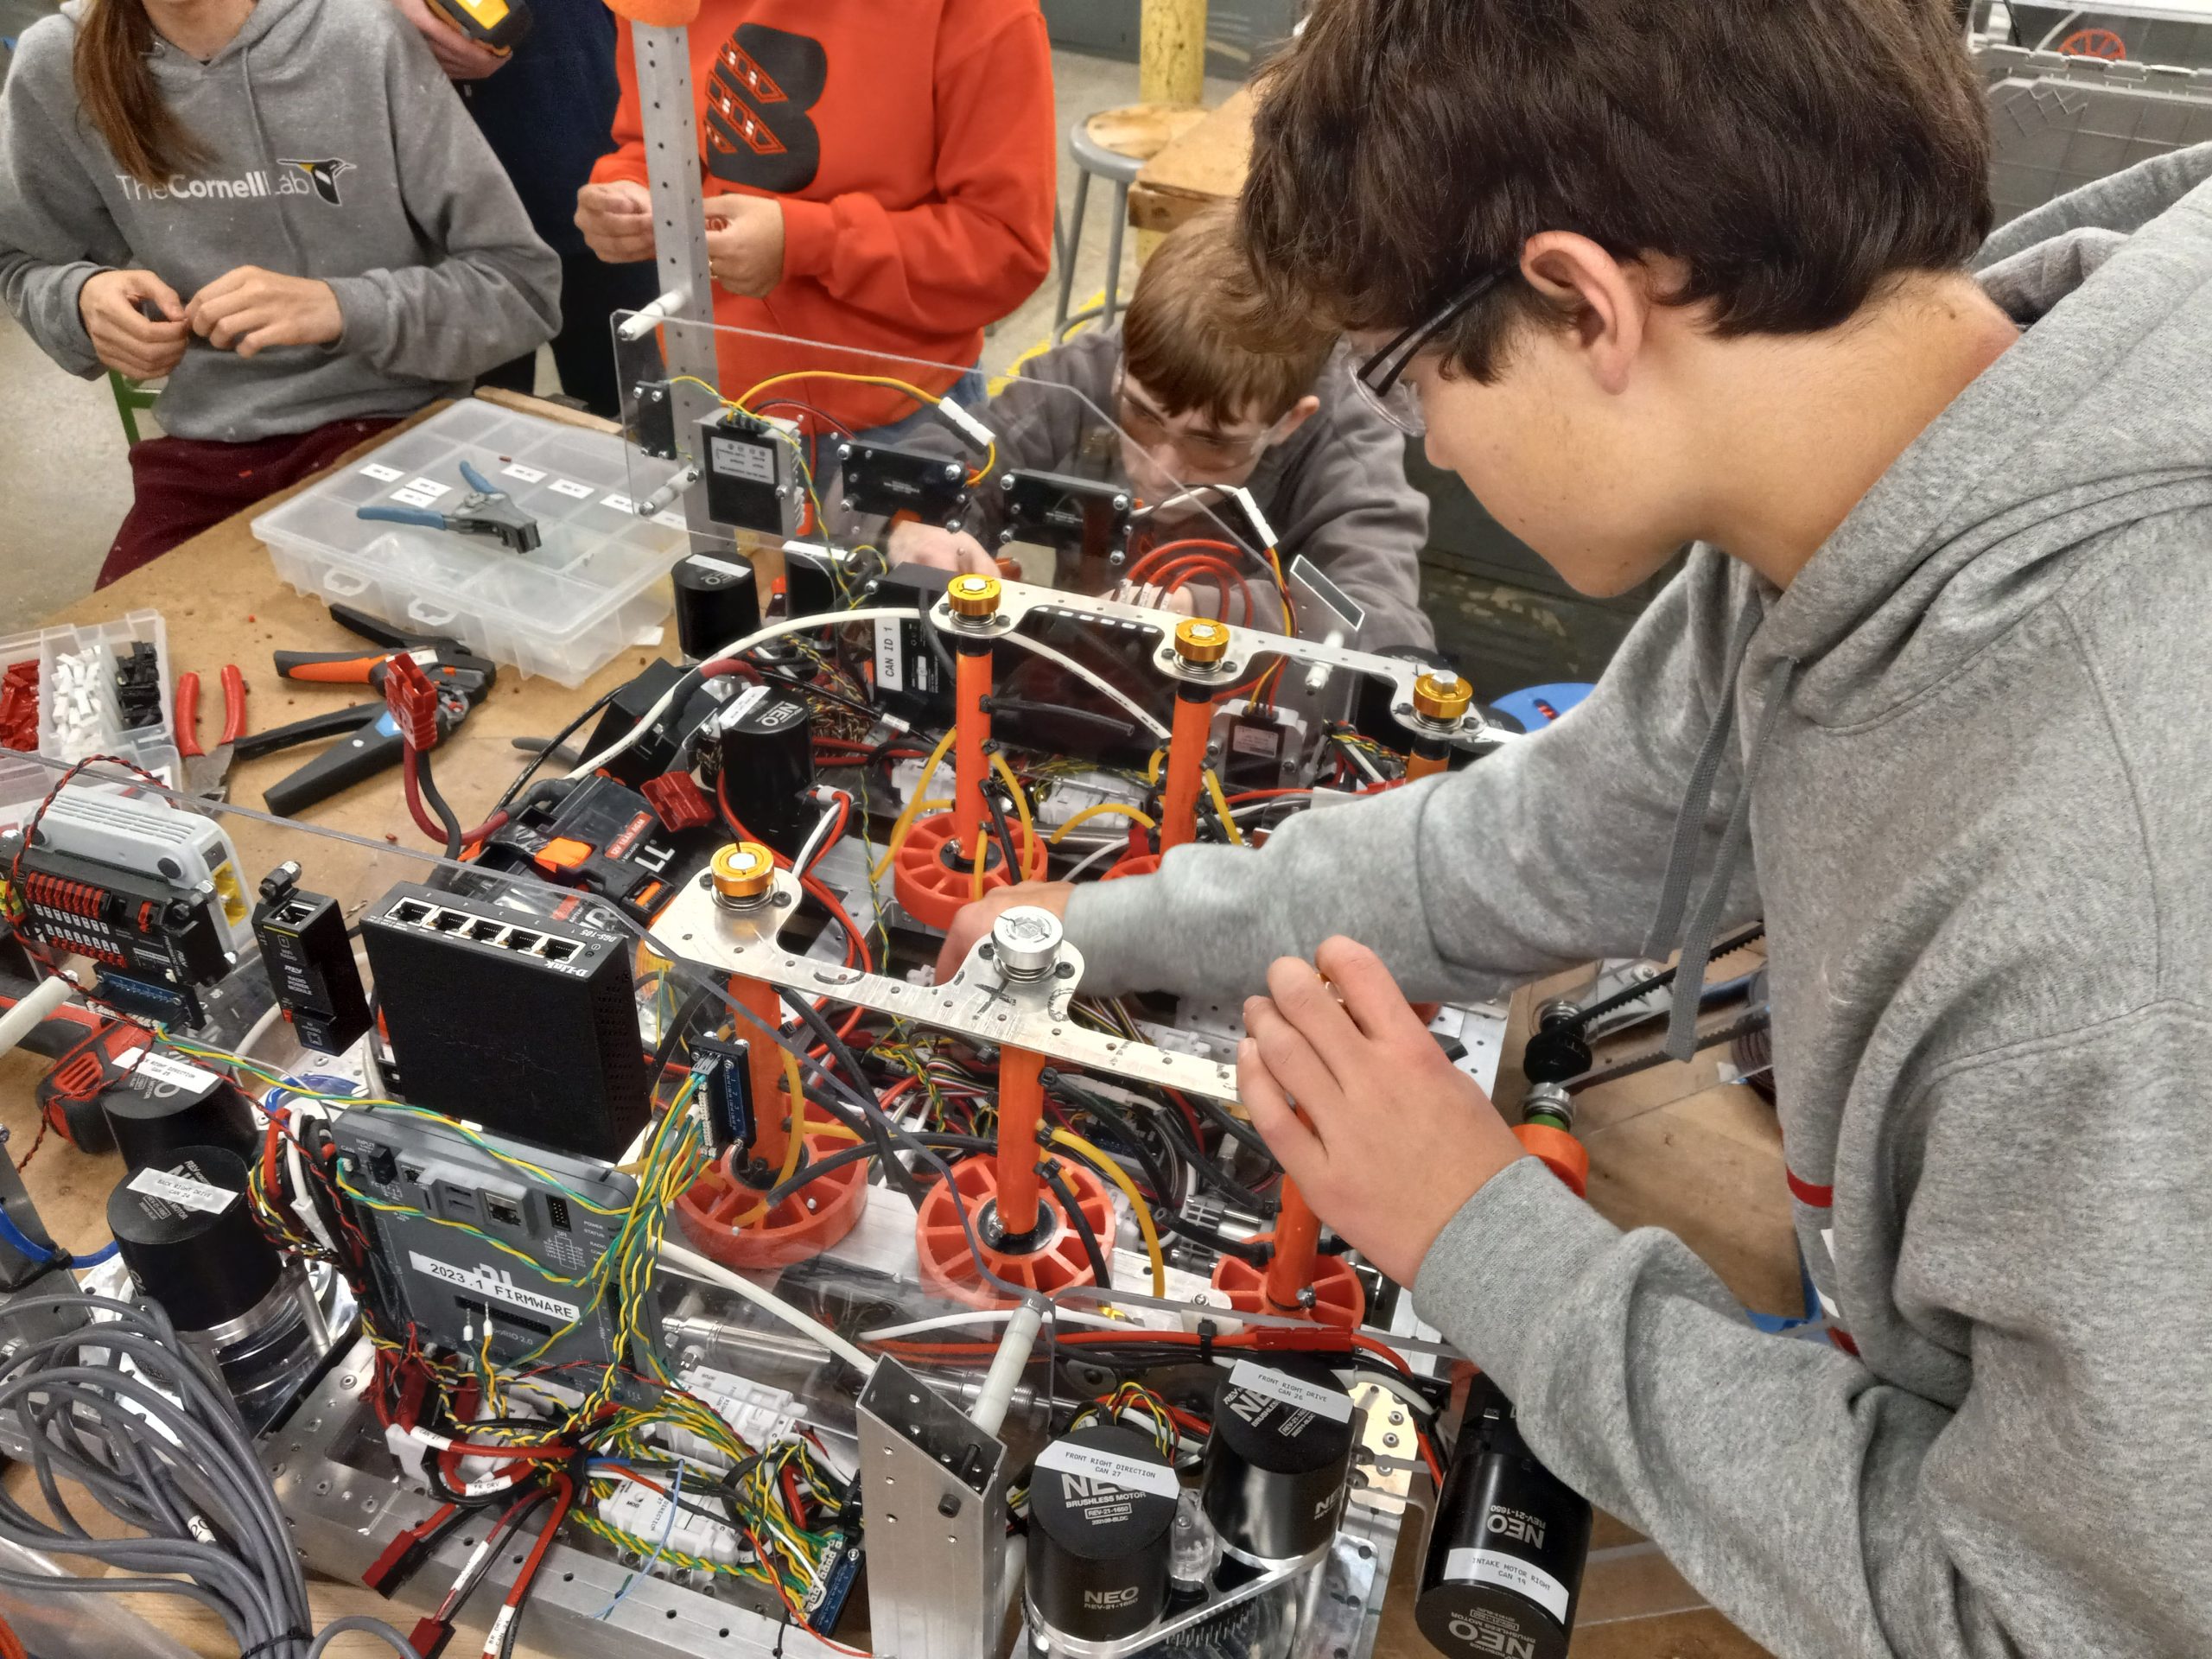 Working hard to get our robot ready for the Sussex Scrimmage